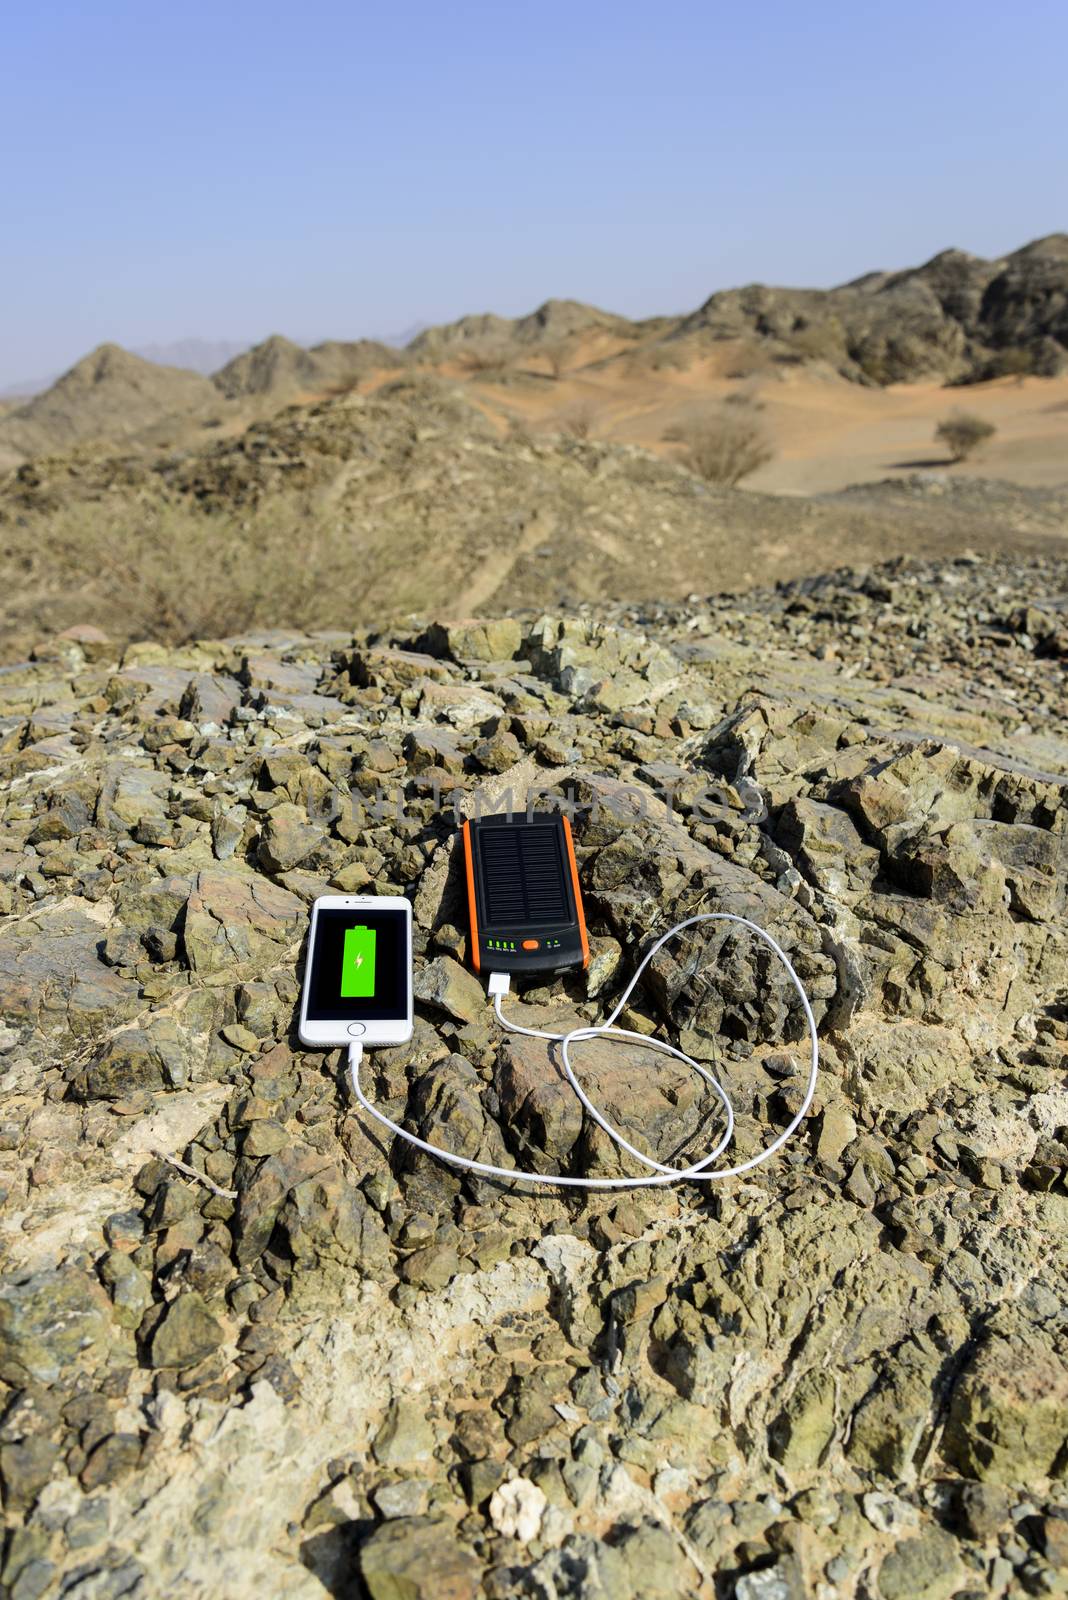 Smartphone charging with solar power bank with Dual USB port. These gadgets are lying on rocks, in the deserted mountain with some sand dunes in background.